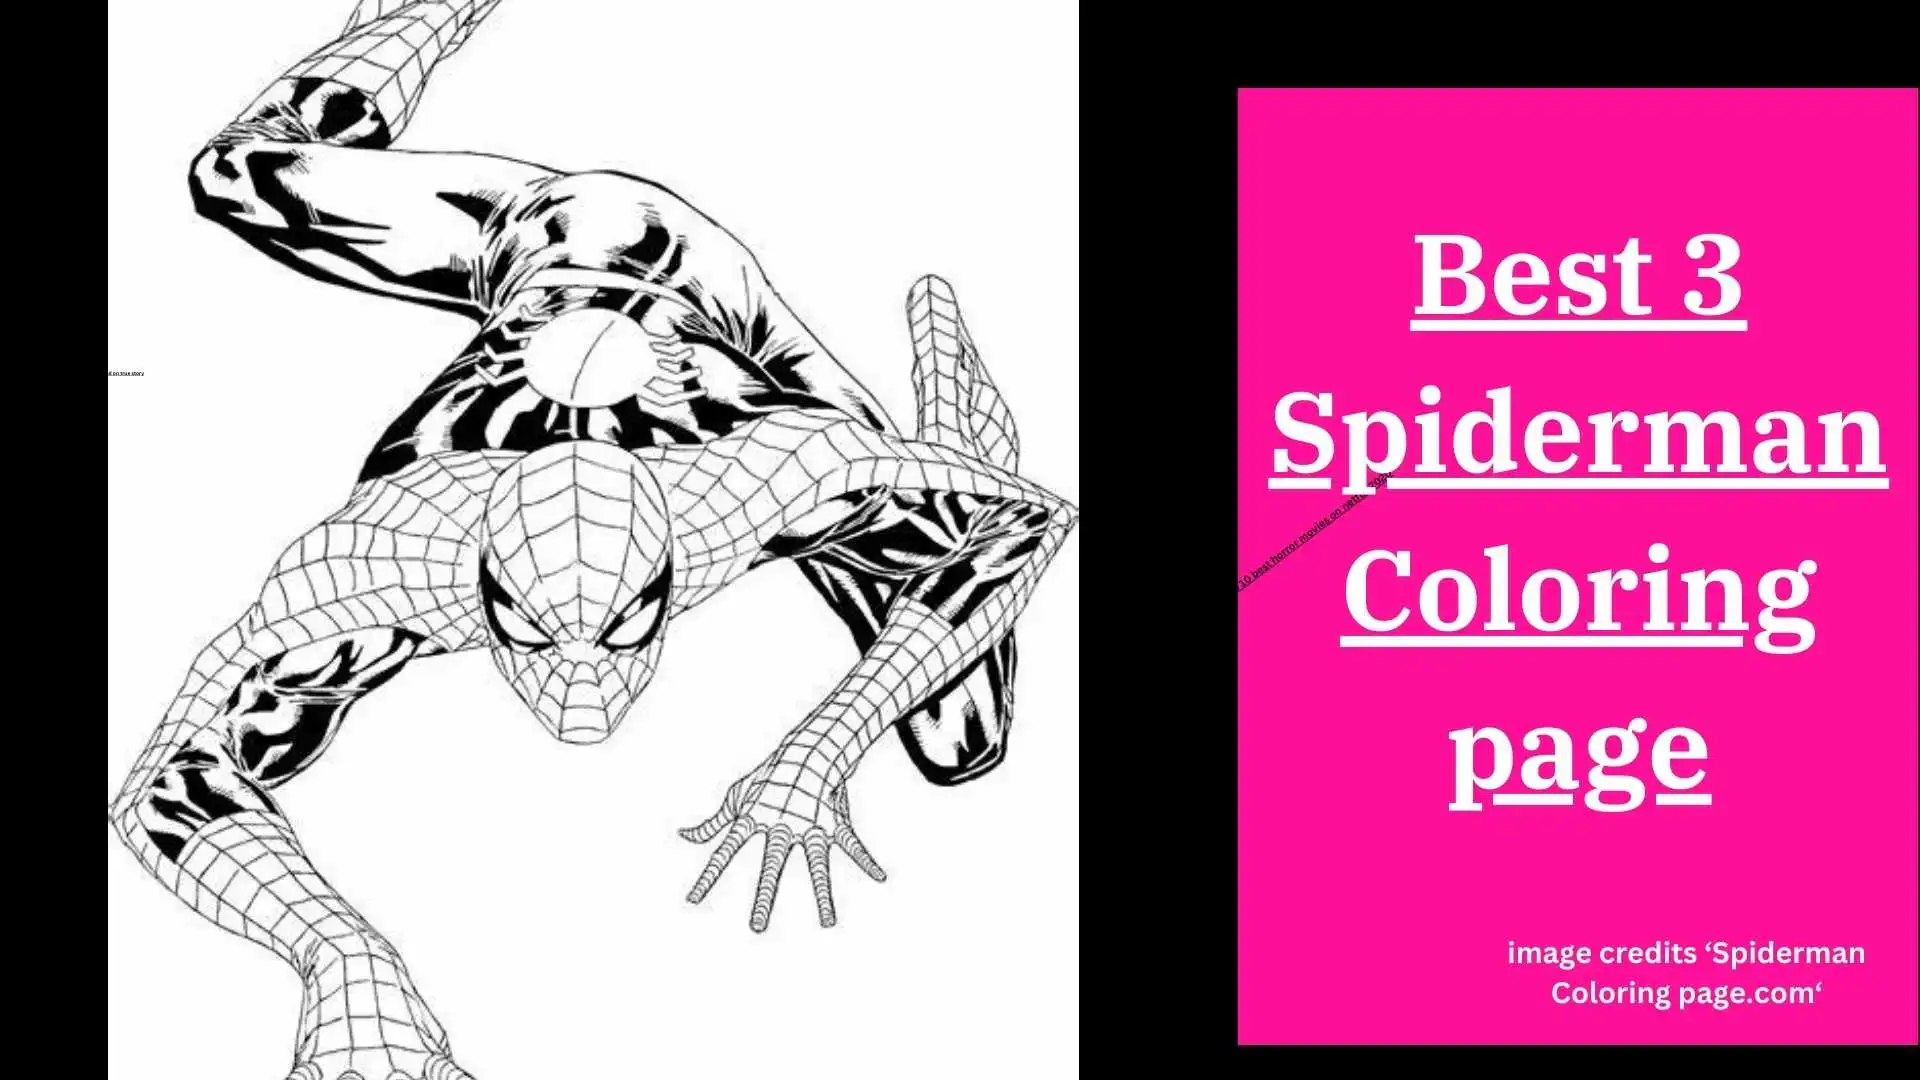 spiderman coloring page